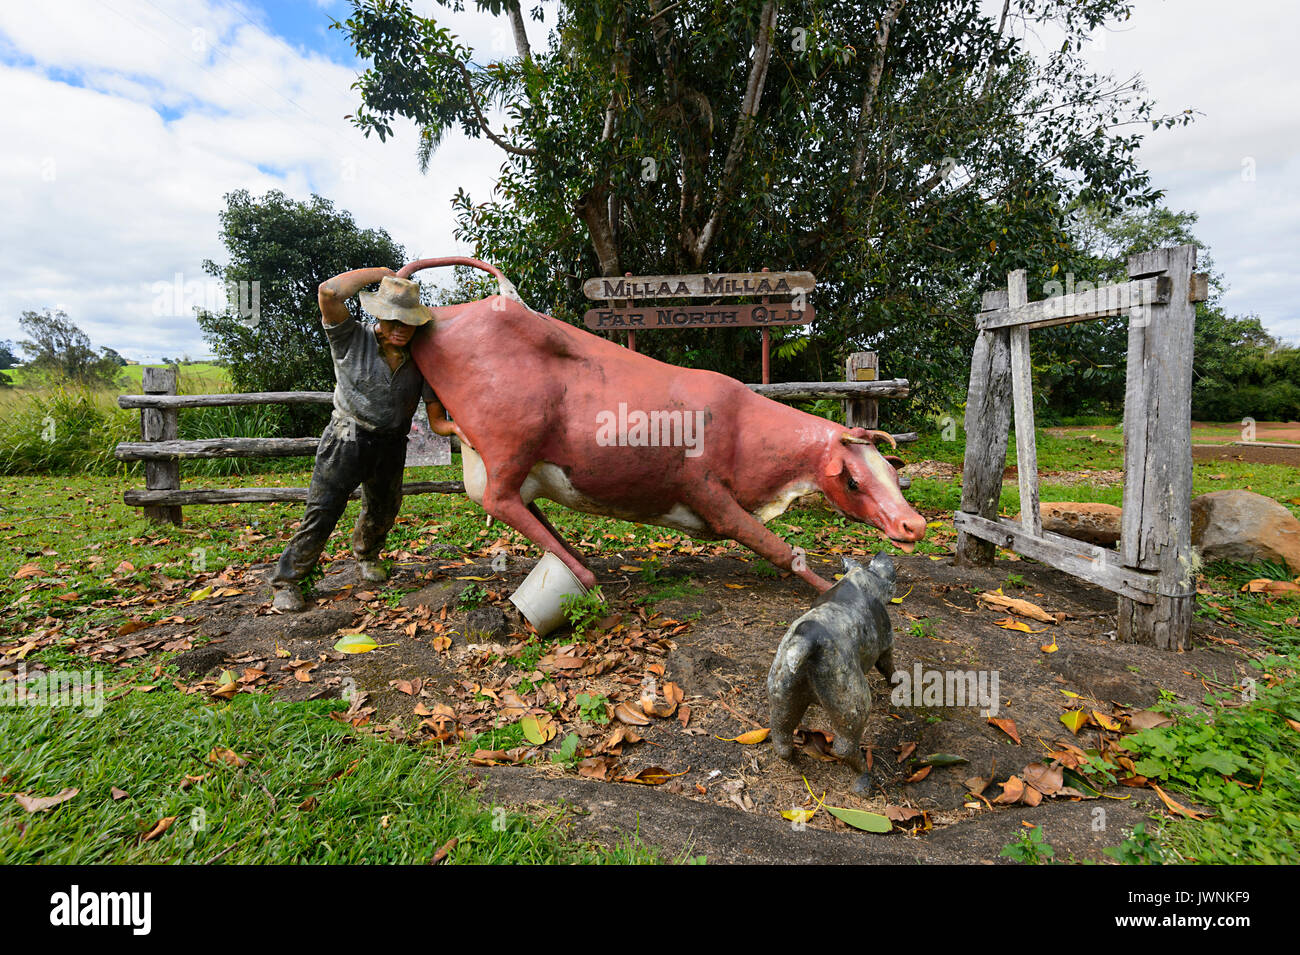 Humorous statue depicting a farmer attempting to milk a cow with his dog causing mayhem, Millaa Millaa, Far North Queensland, FND, QLD, Australia Stock Photo